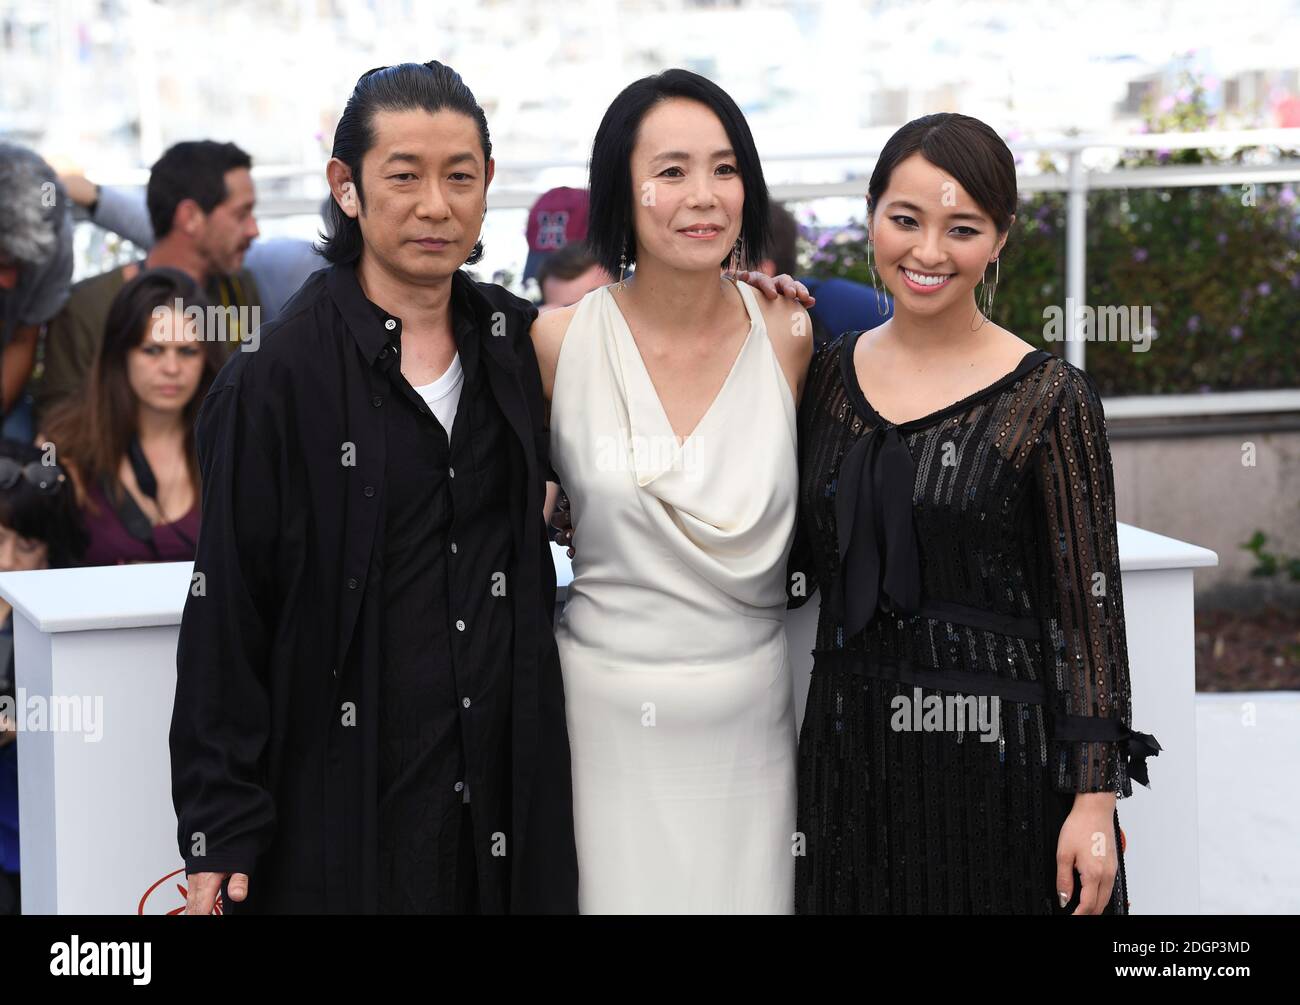 Masatoshi Nagase, Naomi Kawase and Ayame Misaki attending the Radiance photocall as part of the 70th Cannes Film Festival Stock Photo